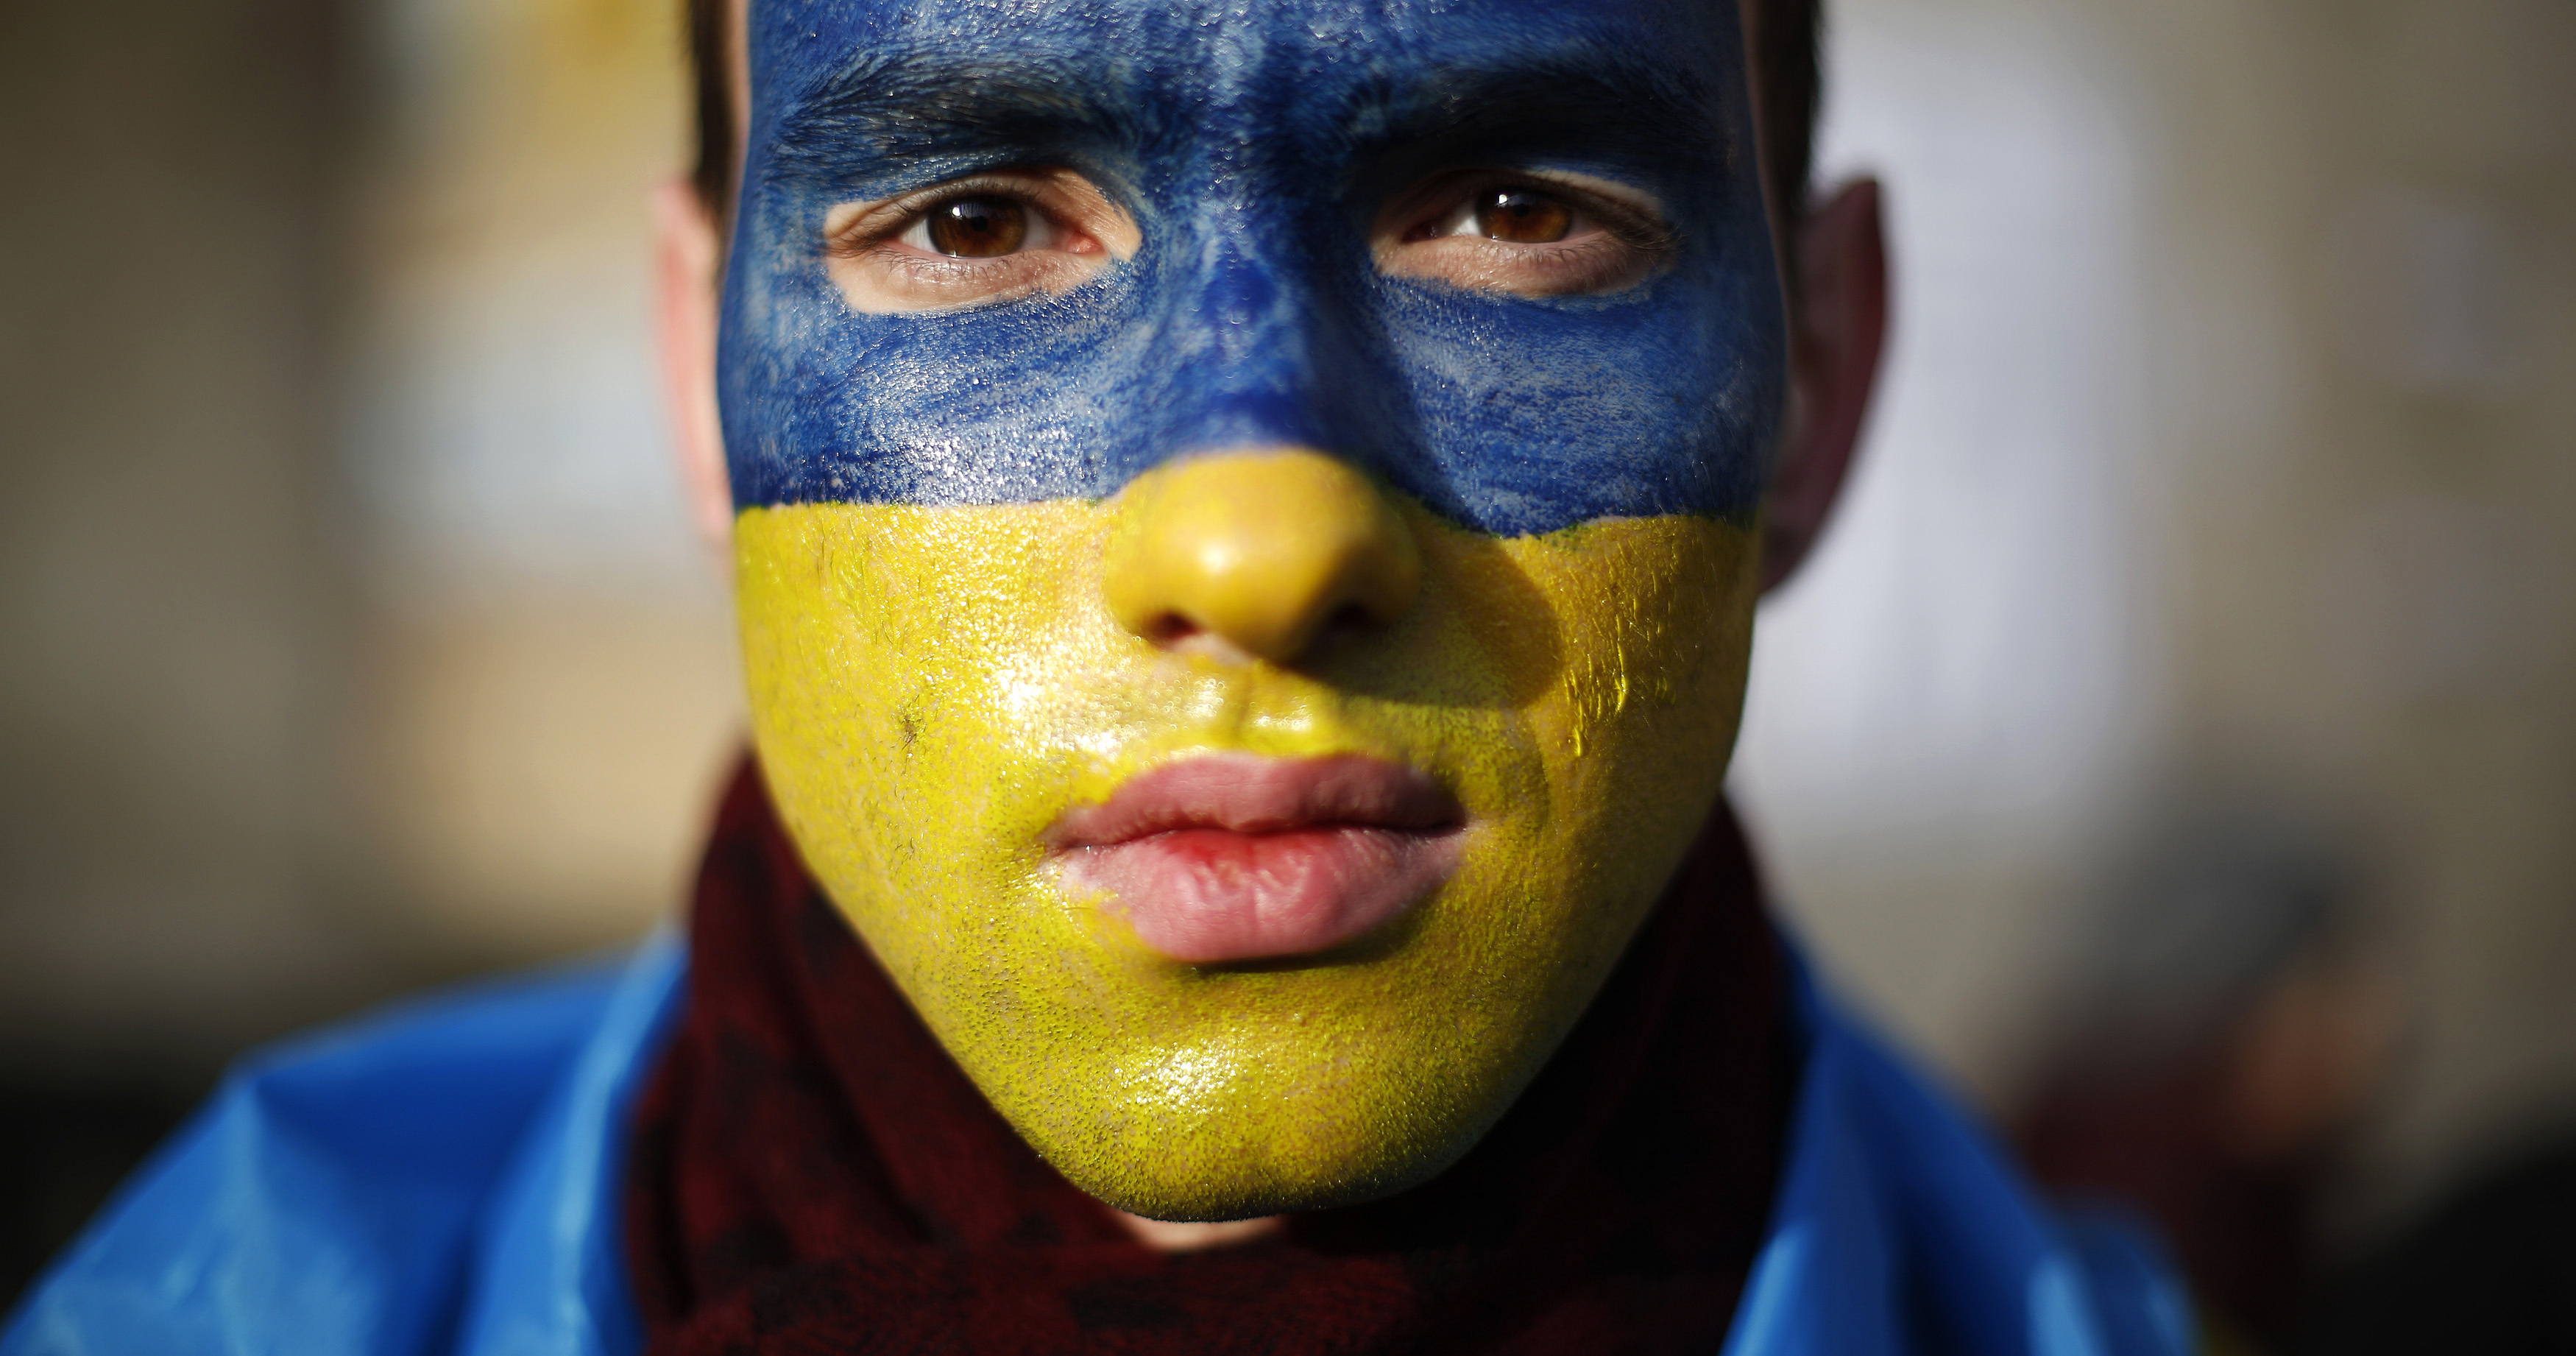 Man with his painted in the colours of the Ukranian flag poses for a portrait at Independence Square in Kiev